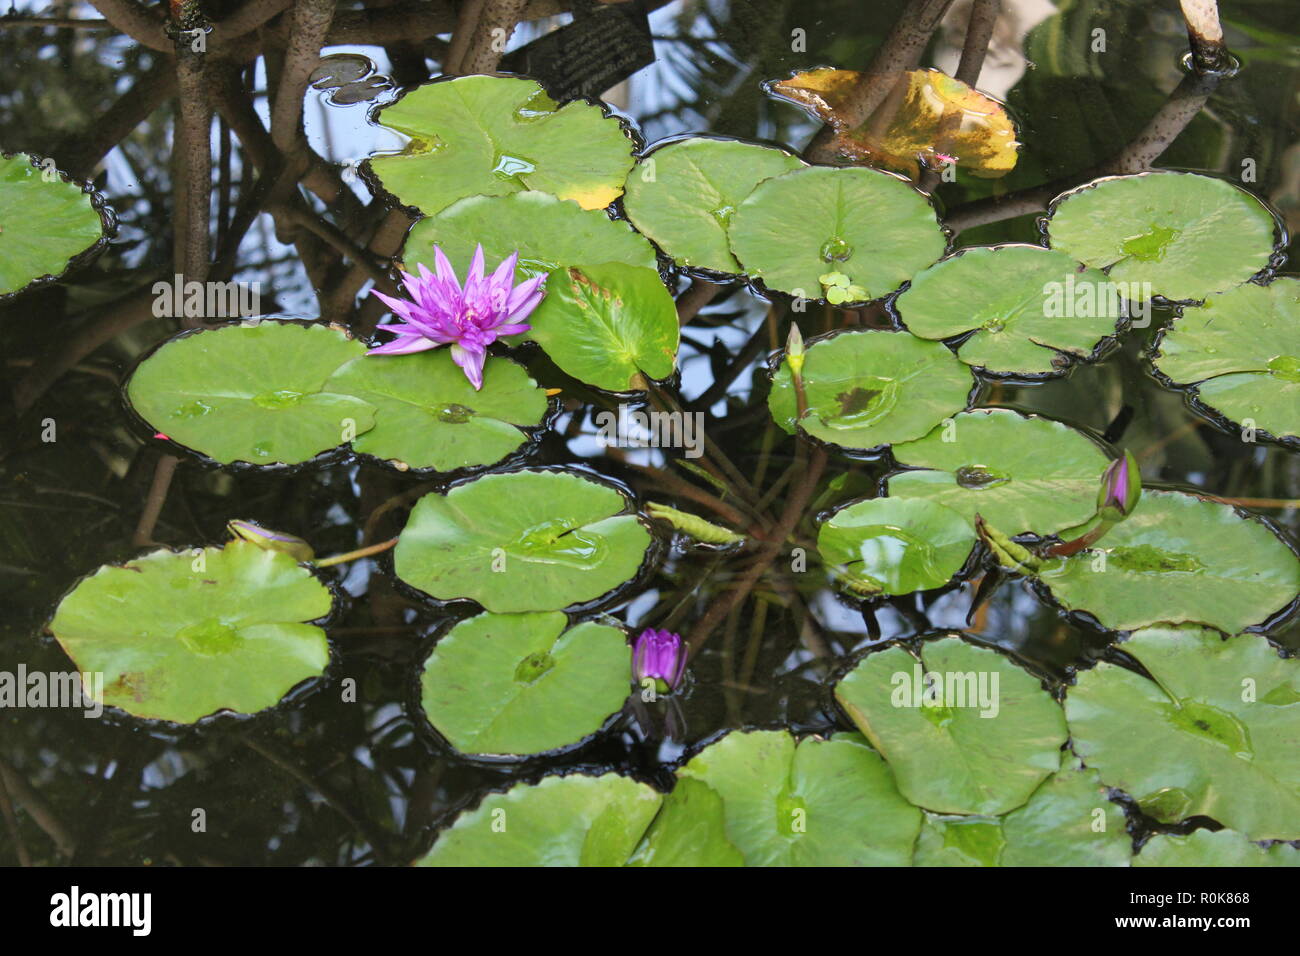 Flawless, beautiful, stunning water lily and pads floating in the pond as Nymphaeaceae plants growing in the flower garden. Stock Photo